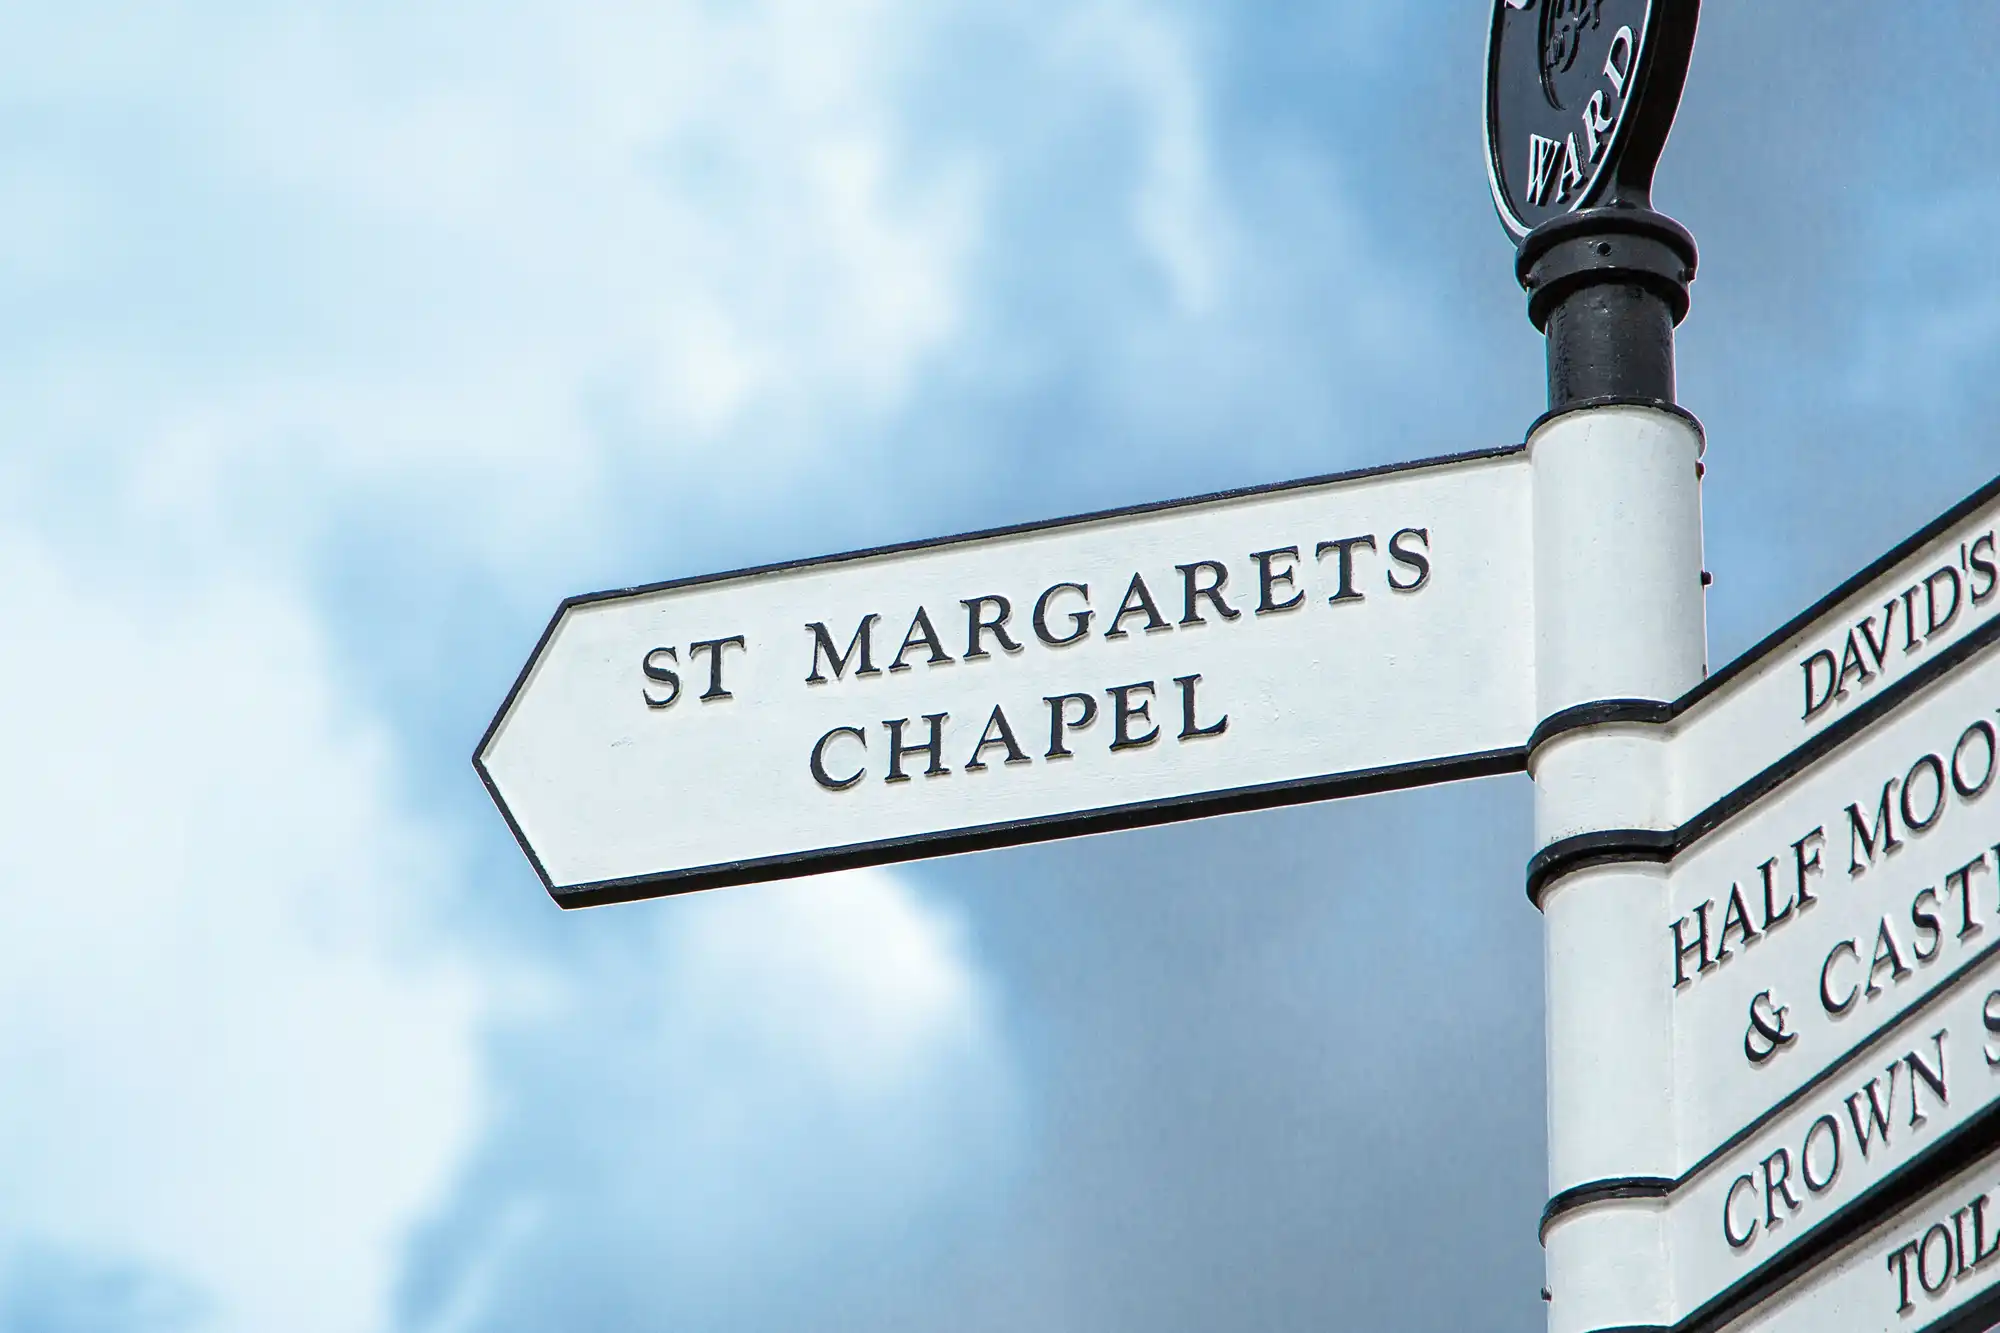 Directional signpost pointing to "st margarets chapel" against a cloudy sky.